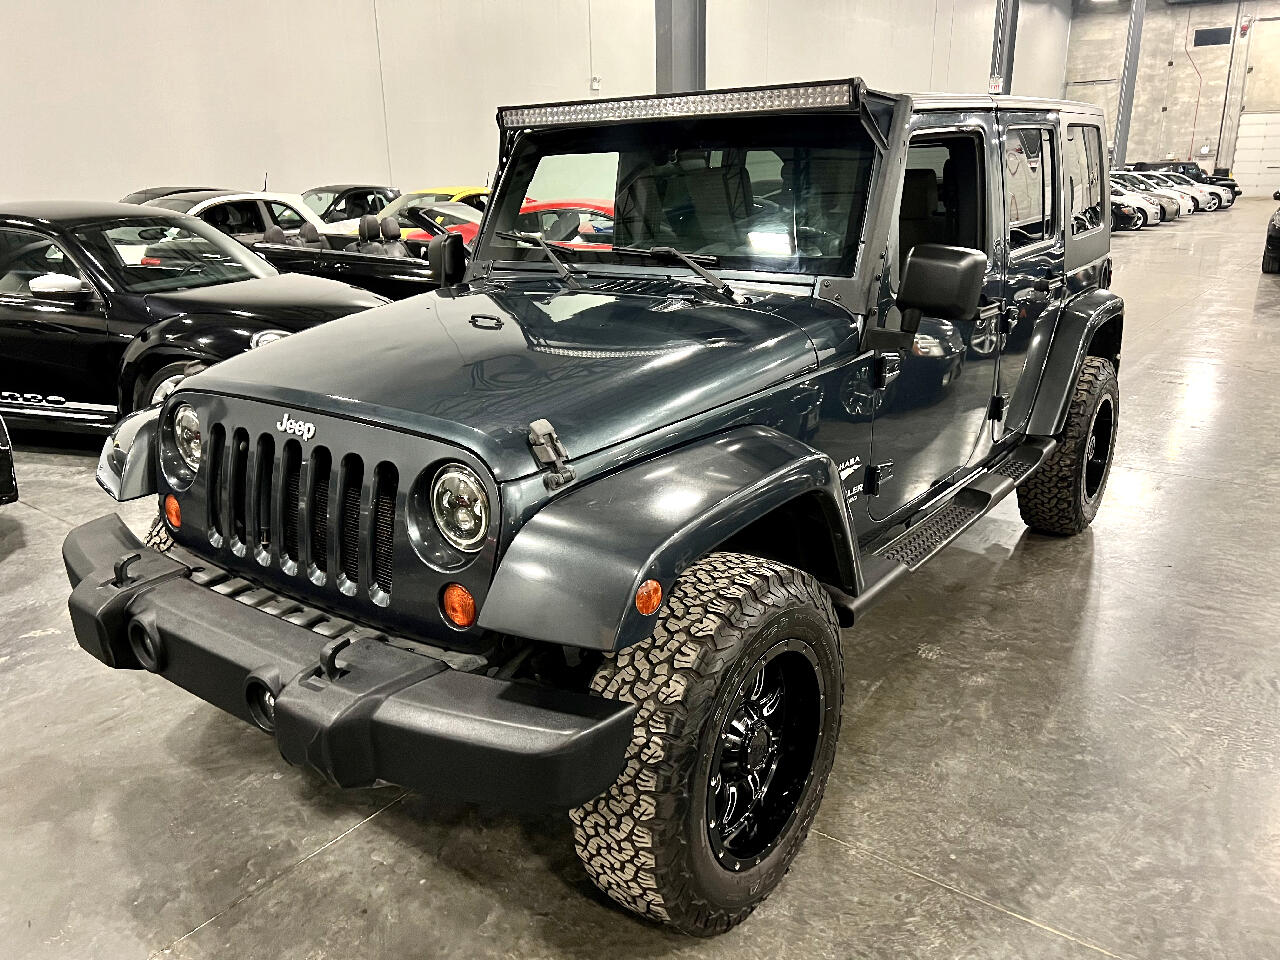 Used 2008 Jeep Wrangler Unlimited Sahara 2WD for Sale in McCook IL 60525  Chicago Fine Motors